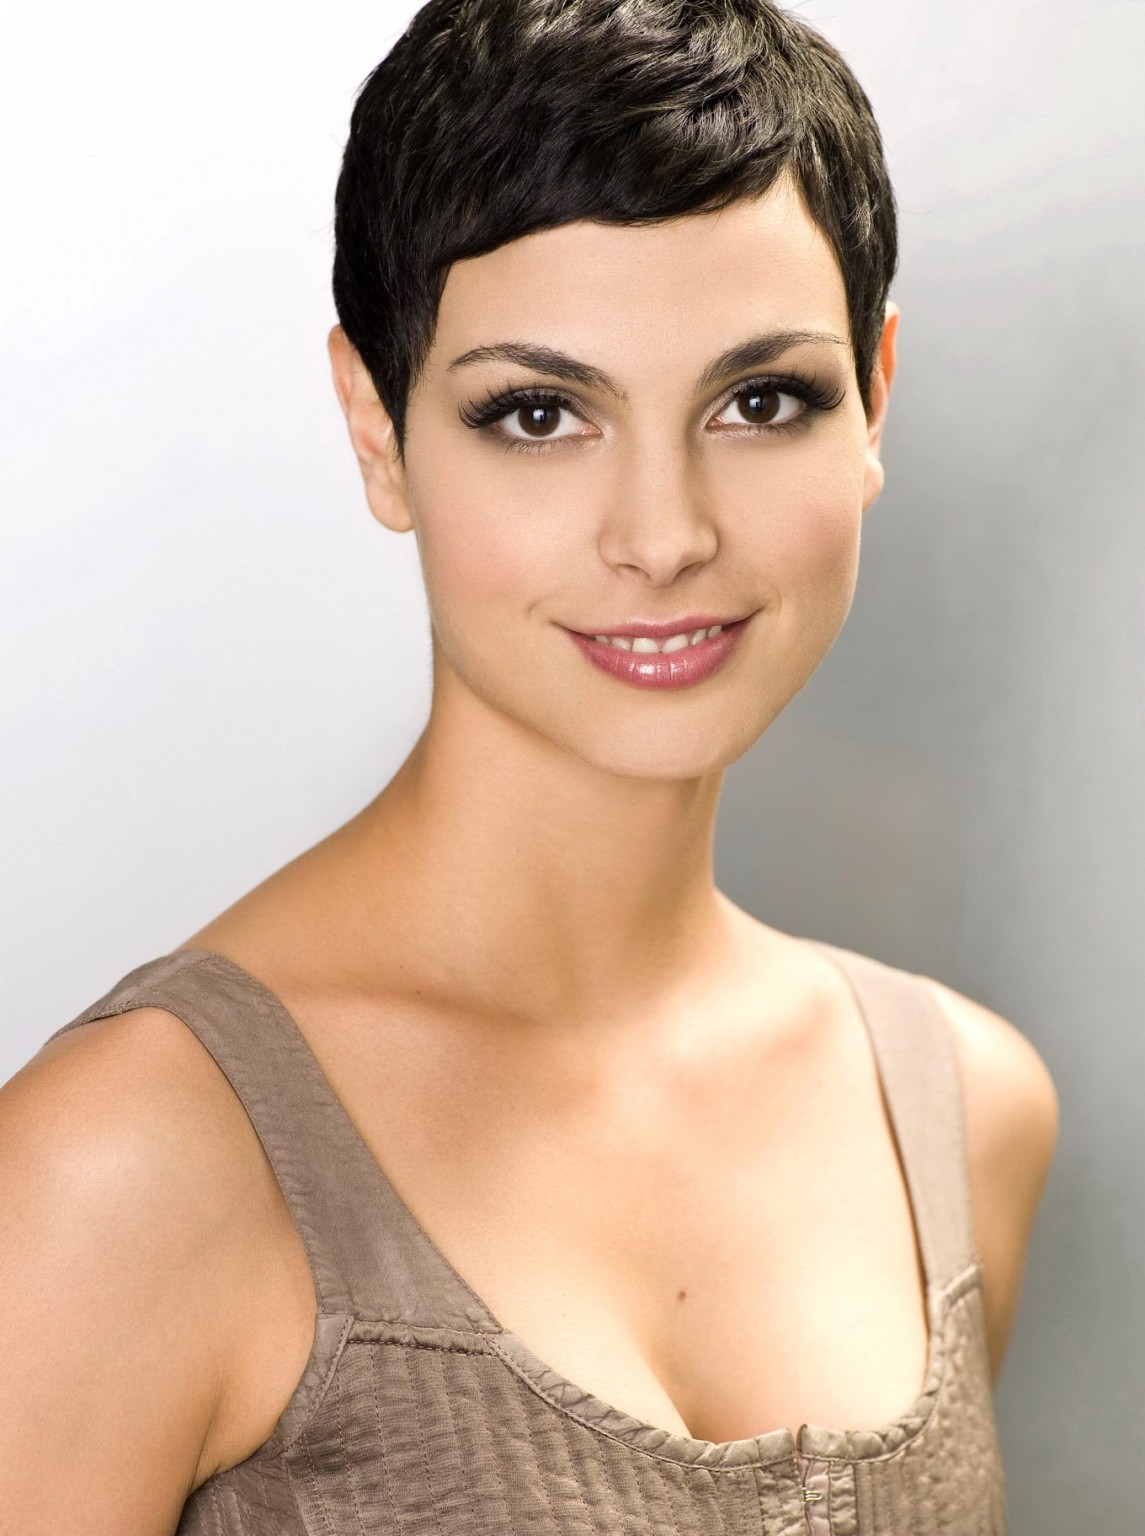 Morena Baccarin looking very hot in the V promotional shoot #75195031